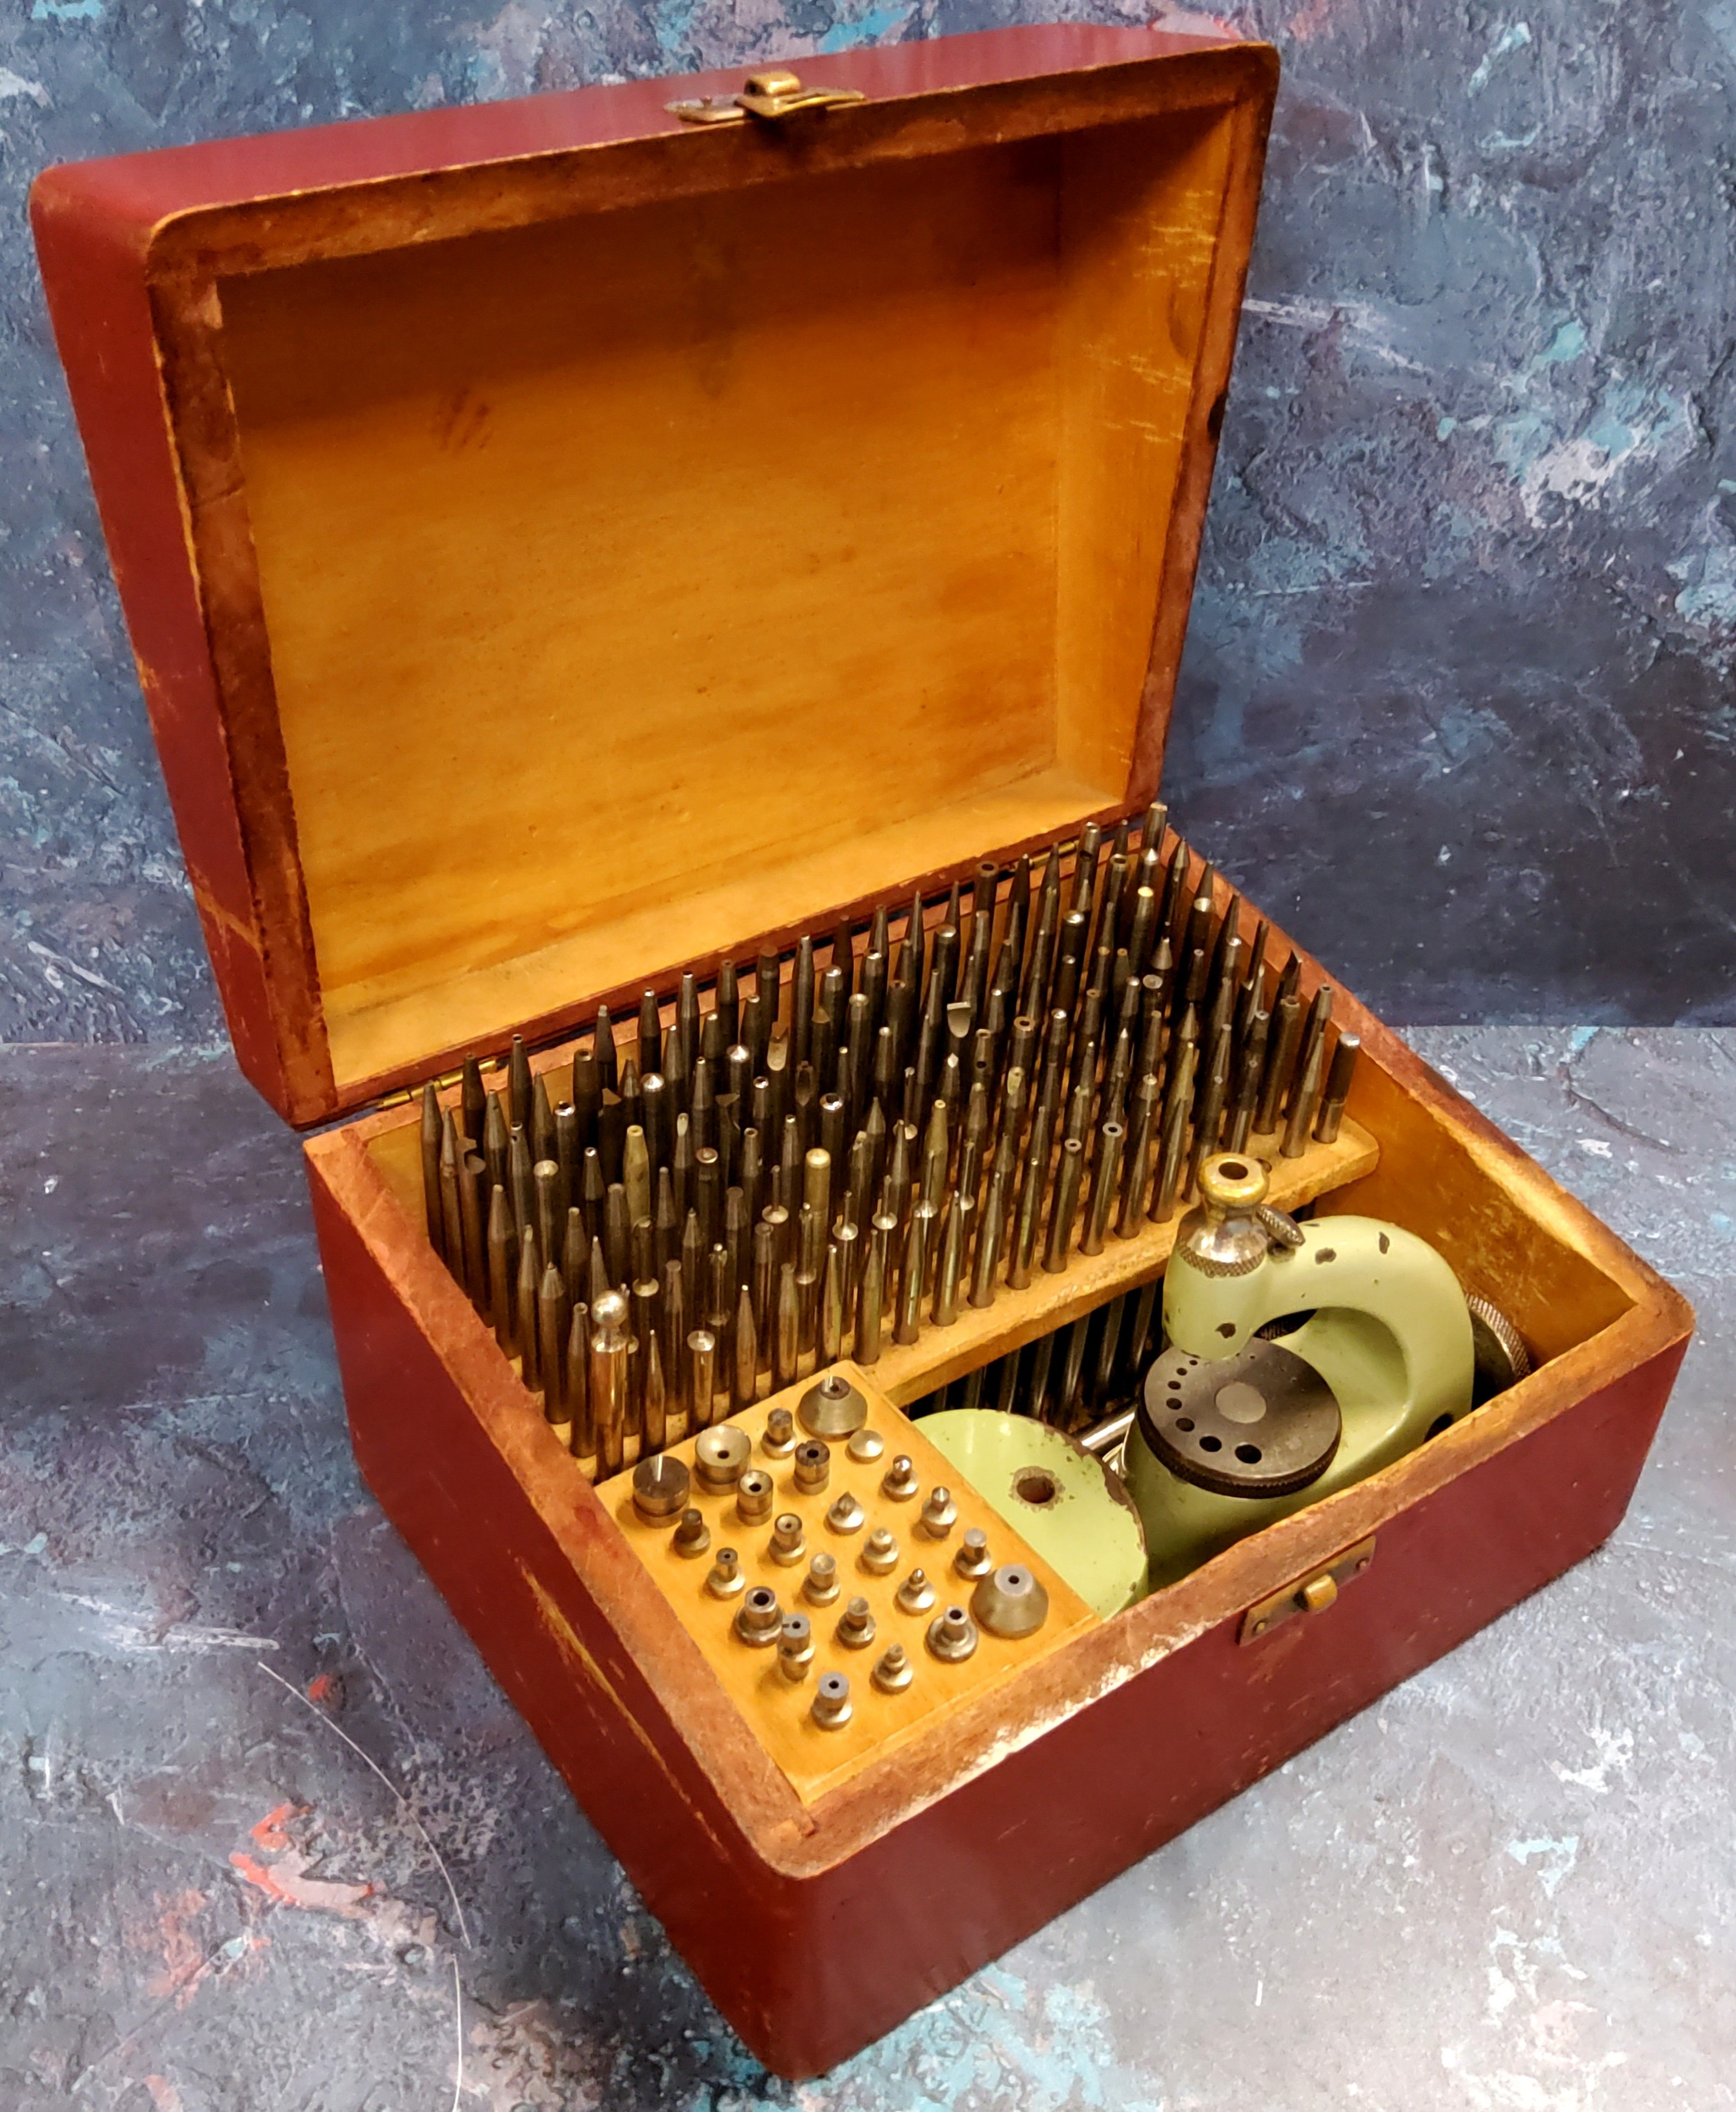 Watch Maker's & Jeweller's Tools - An early Swiss 'FAVORITE GB' pusher press, with comprehensive